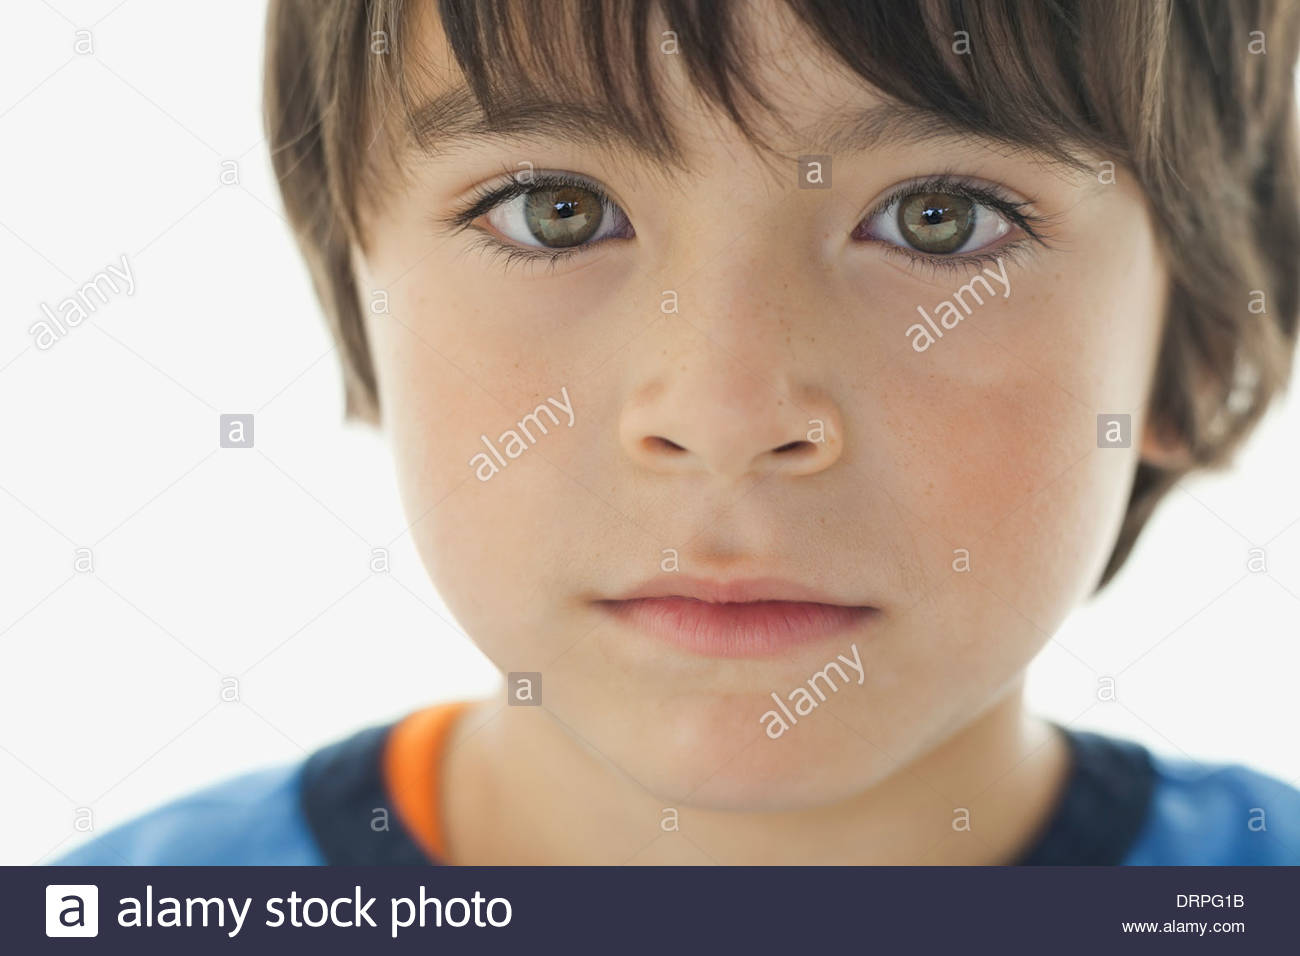 Close-up portrait of boy looking at camera Stock Photo